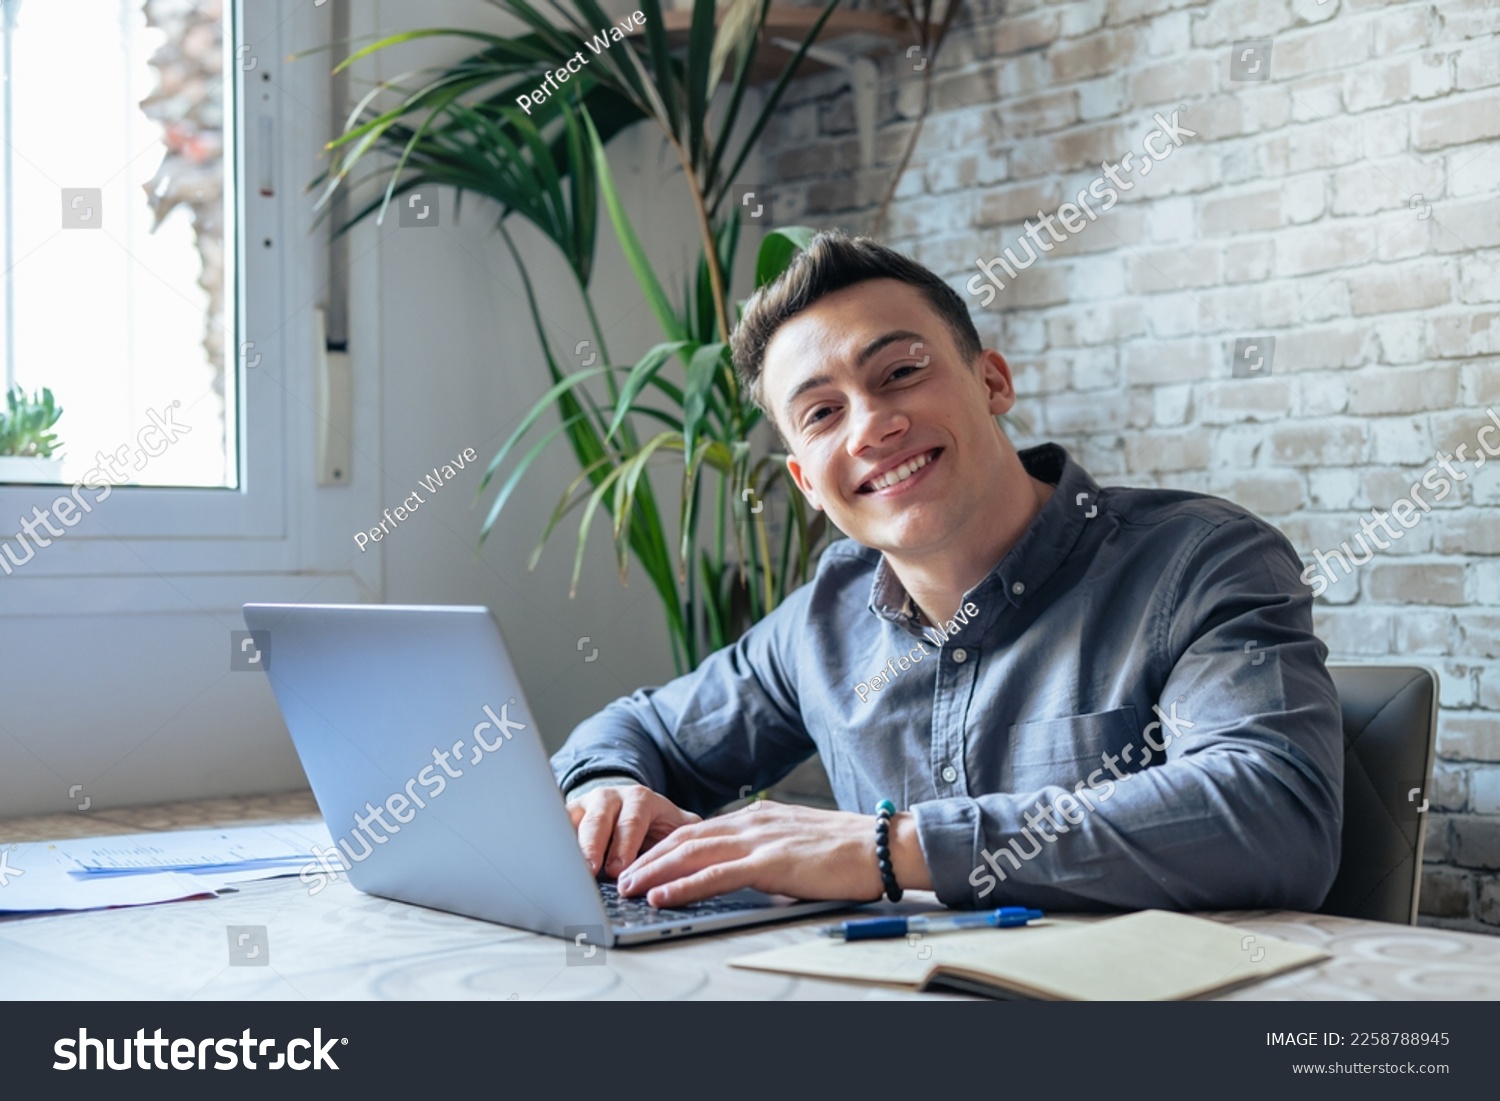 Good-looking millennial office employee in glasses sitting at desk in front of laptop smiling looking at camera. Successful worker, career advance and opportunity, owner of prosperous business concept #2258788945